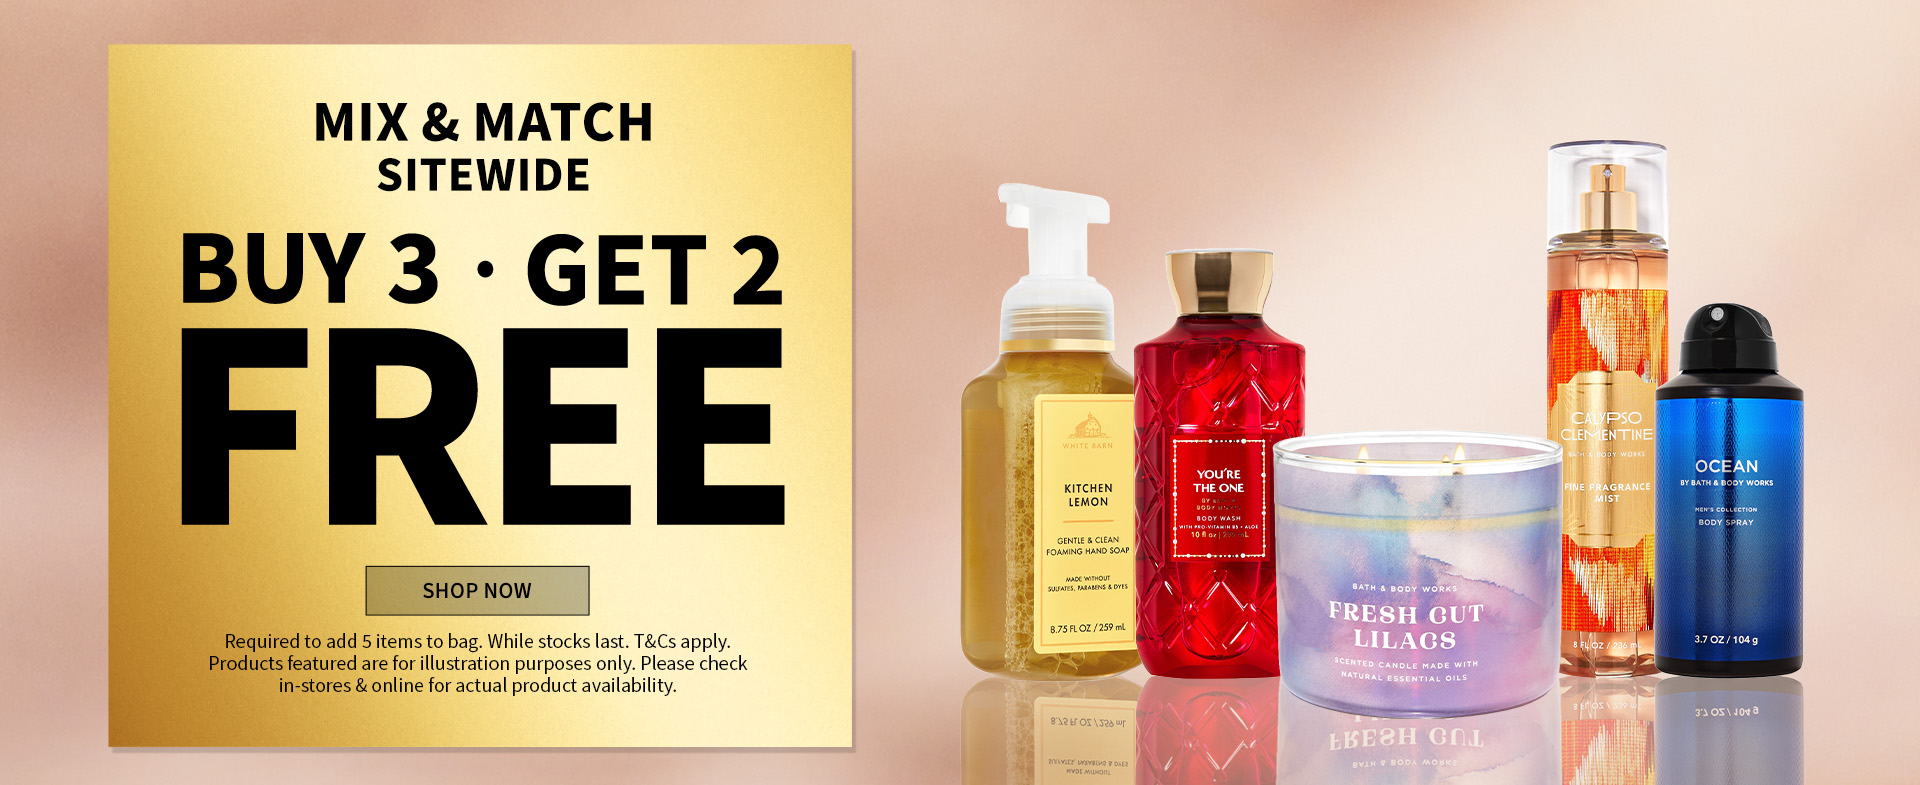 MIX and MATCH SITEWIDE BUY 3 GET 2 FREE